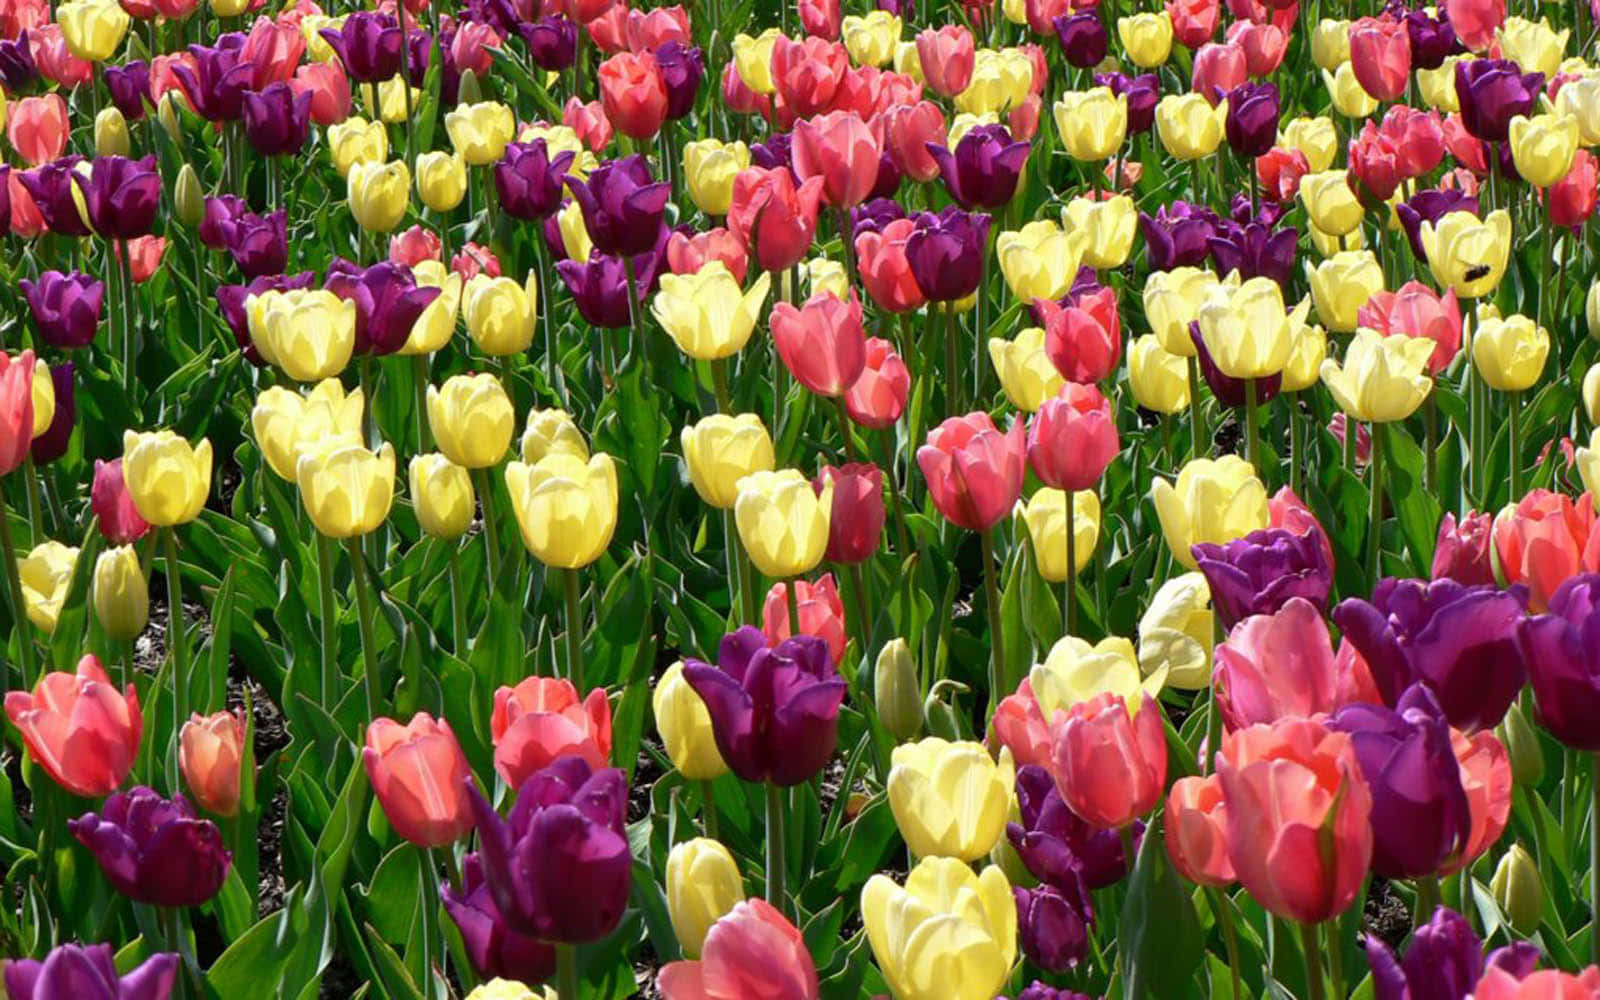 Spring Flower Background Of Colorful Tulips In A Field